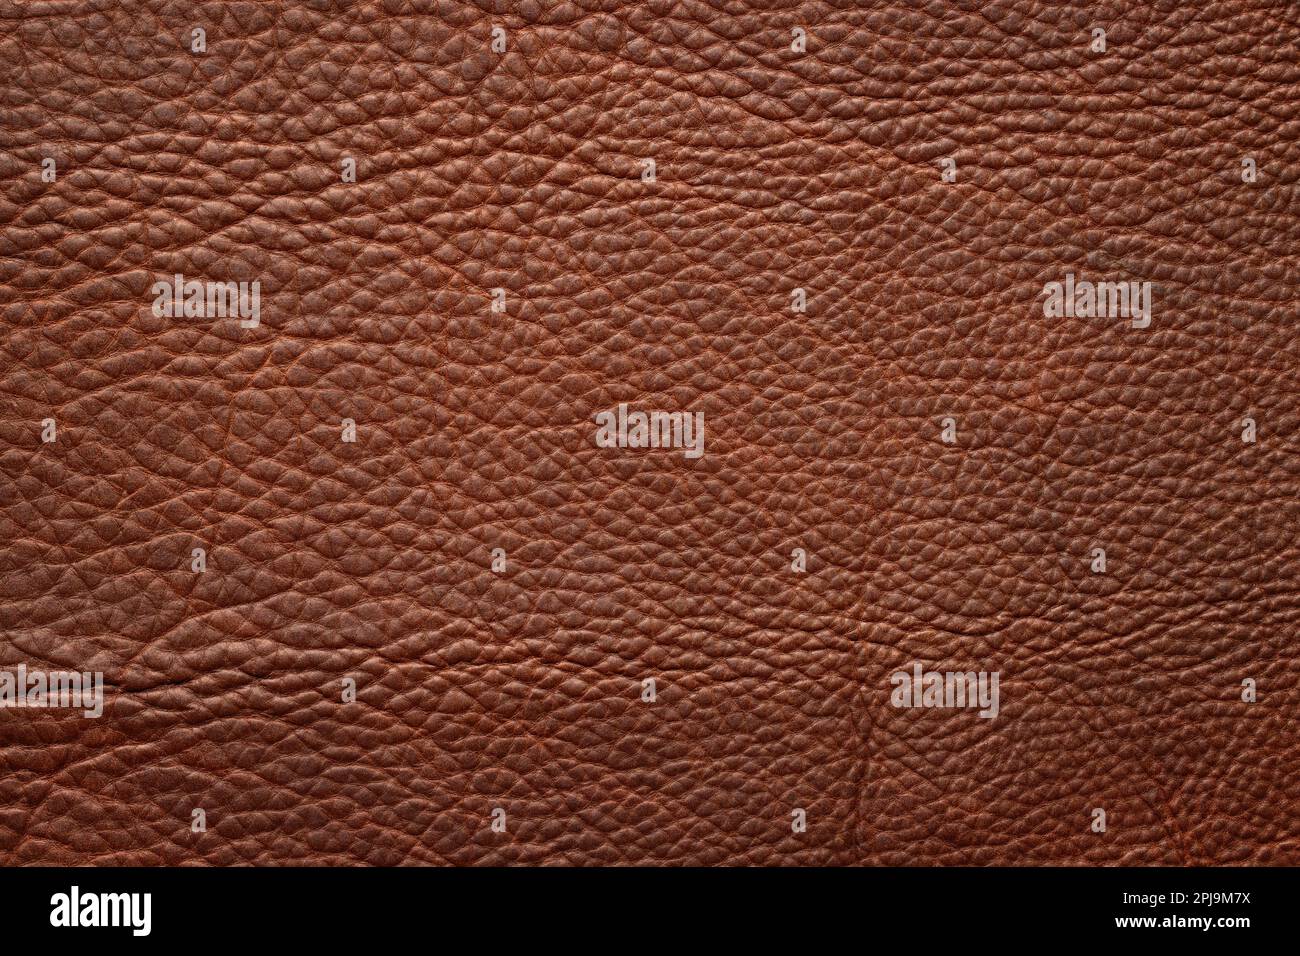 Brown natural or genuine leather texture for background. Saffiano leather.  Stock Photo